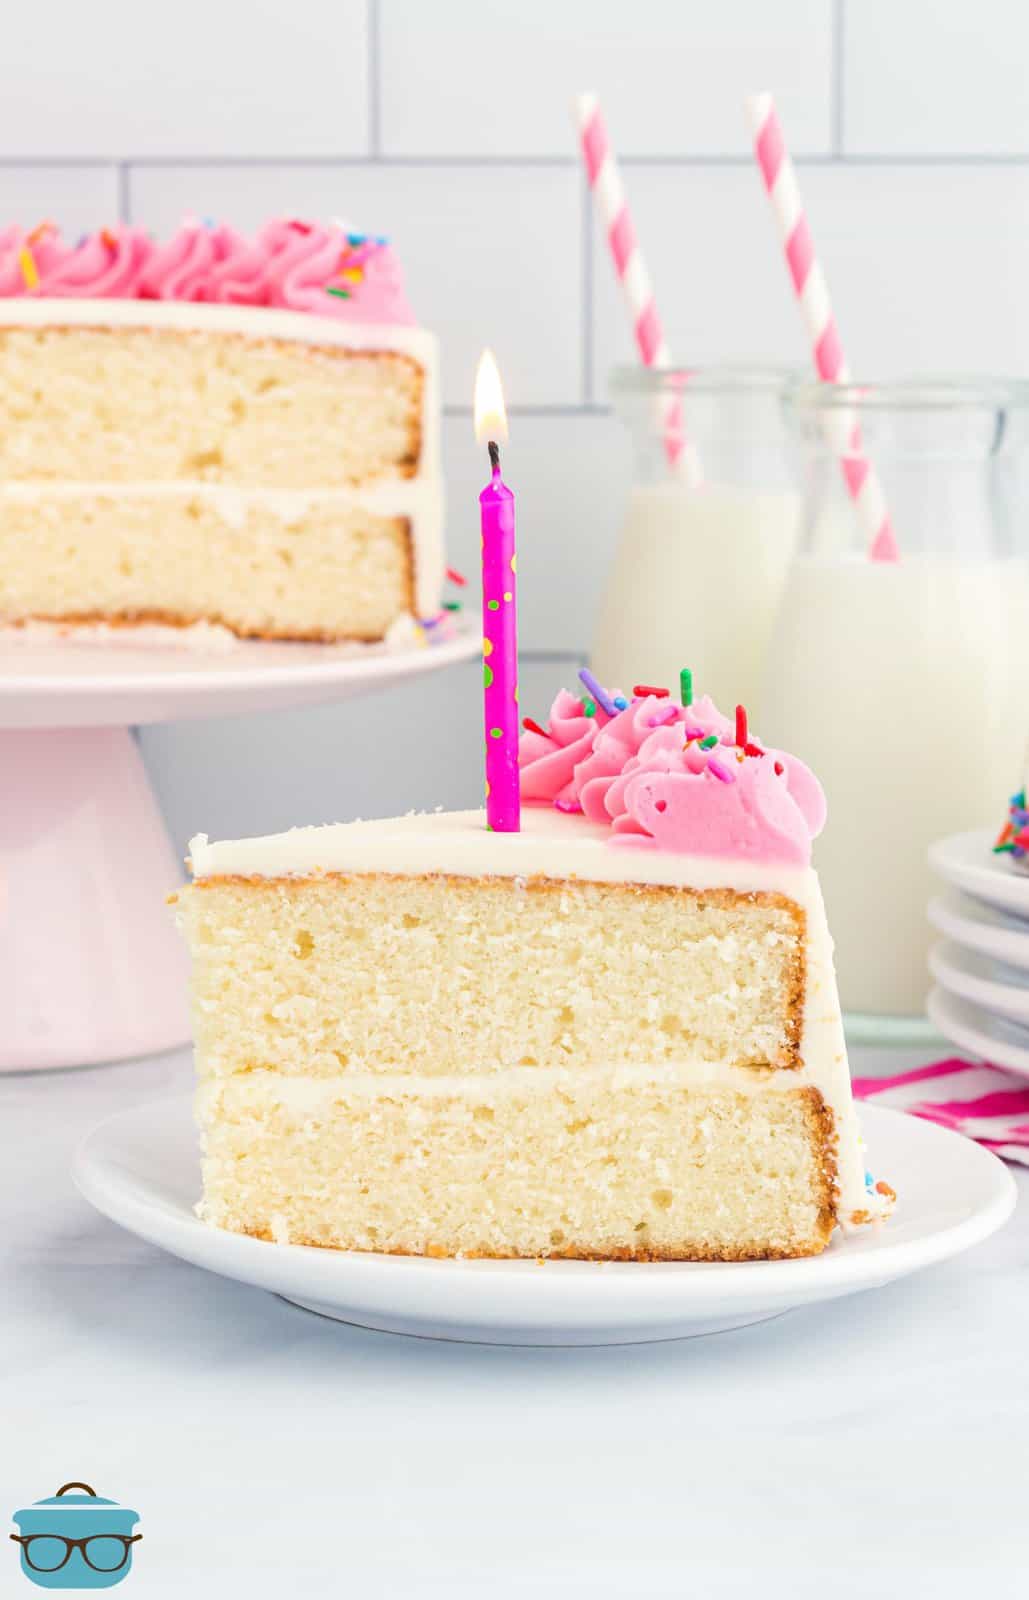 A slice of homemade white cake that is layered and has a homemade frosting and candles on top.